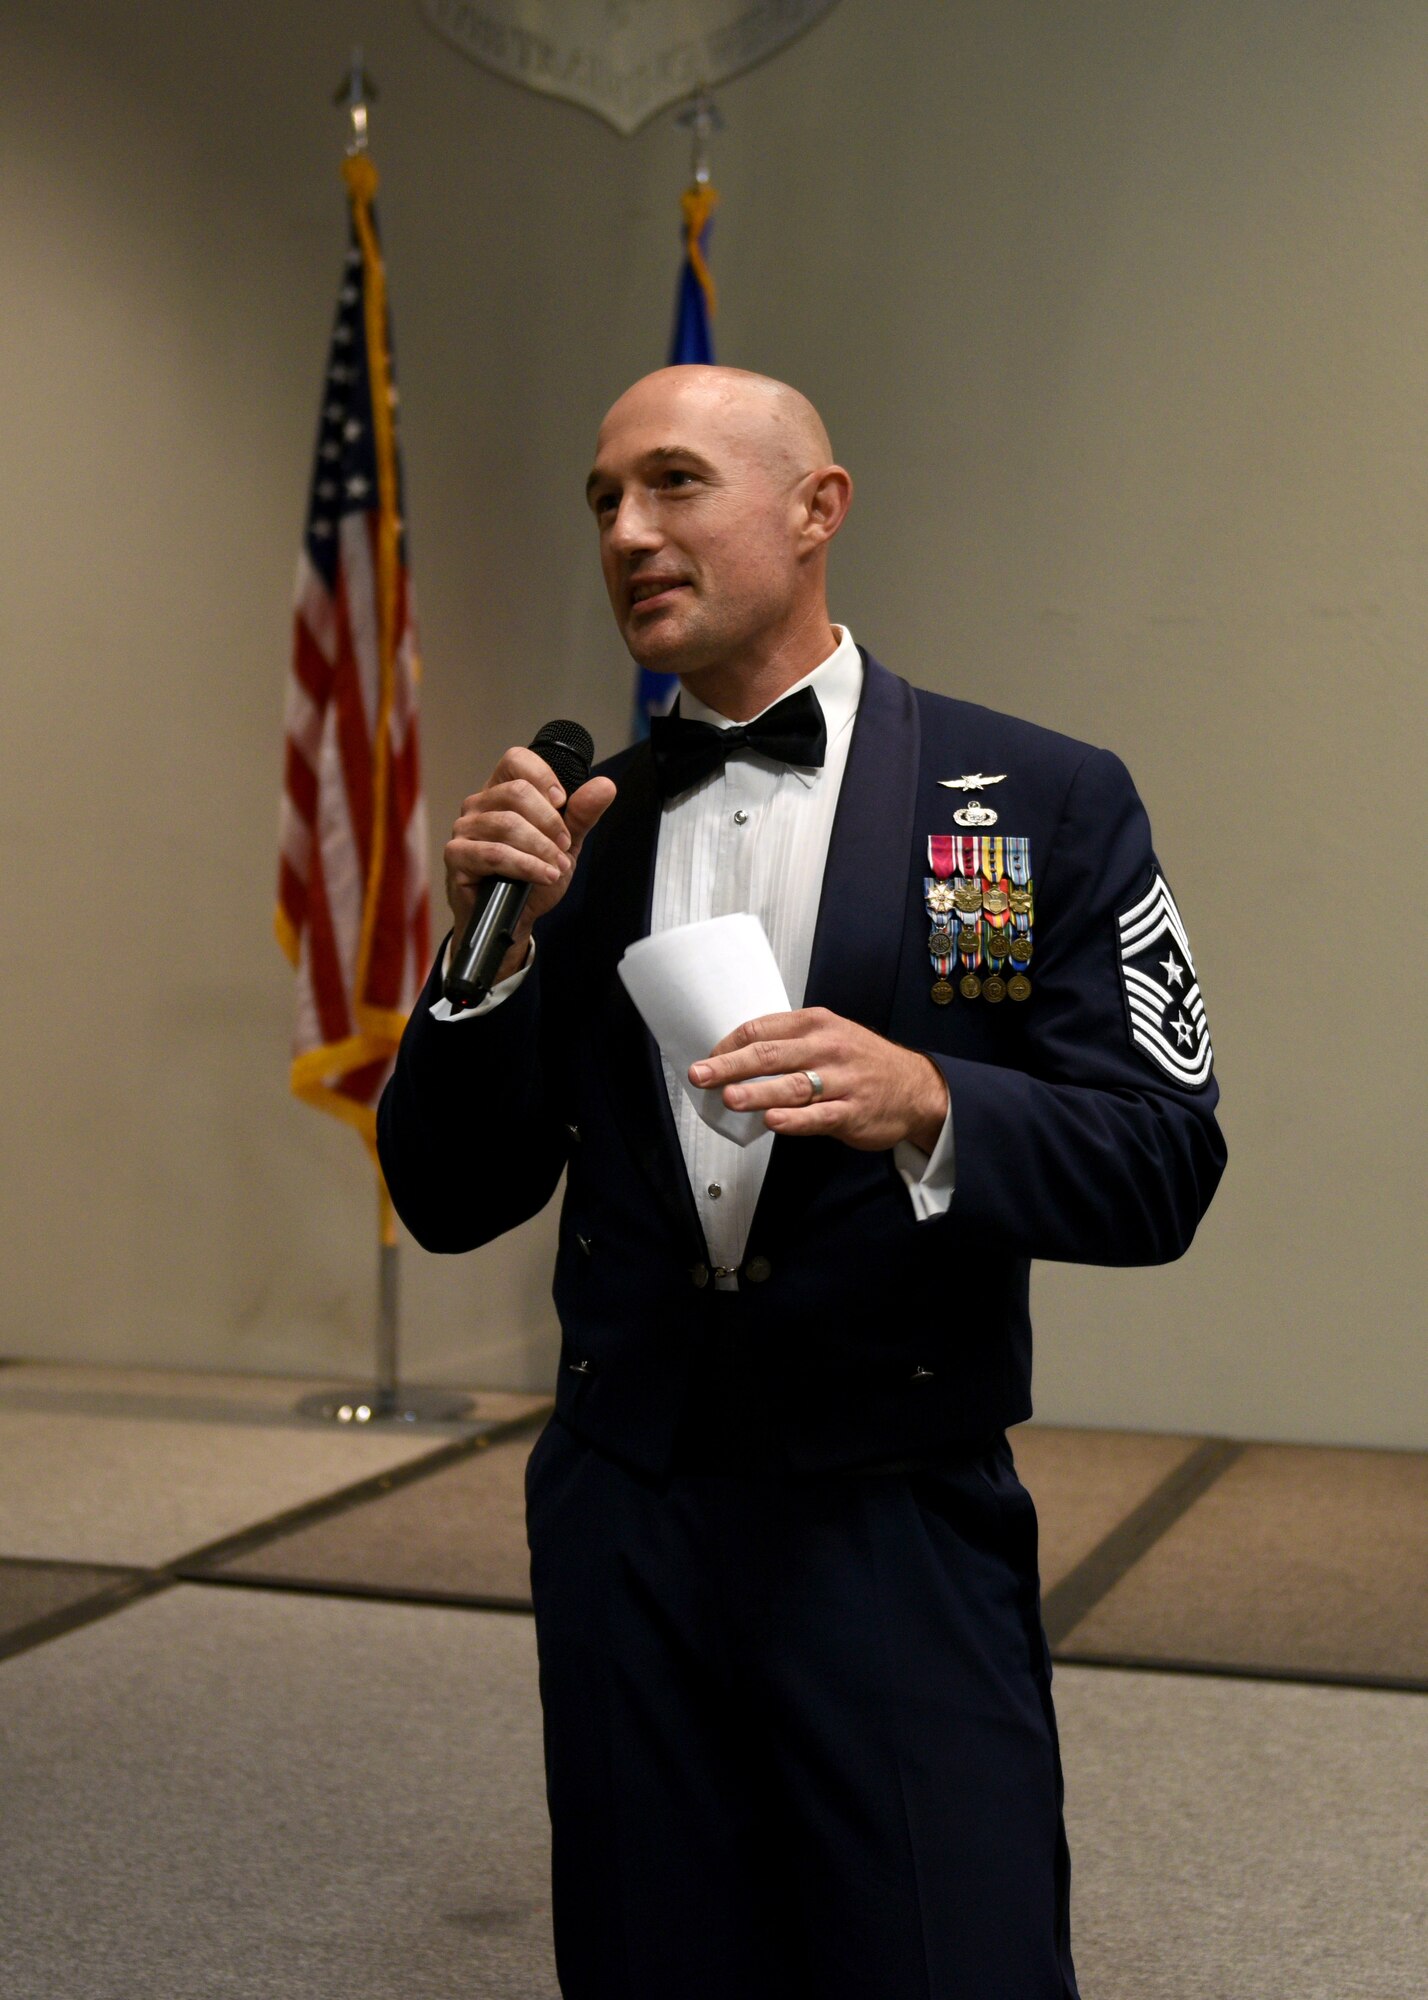 U.S. Air Force Chief Master Sgt. Stefan Blazier, 37th Training Wing command chief, speaks during the Senior Noncommissioned Officer Induction Ceremony at the event center on Goodfellow Air Force Base, Texas, August 16, 2019. Blazier was previously the instructor supervisor for the 315th Training Squadron. (U.S. Air Force photo by Airman 1st Class Robyn Hunsinger/Released)